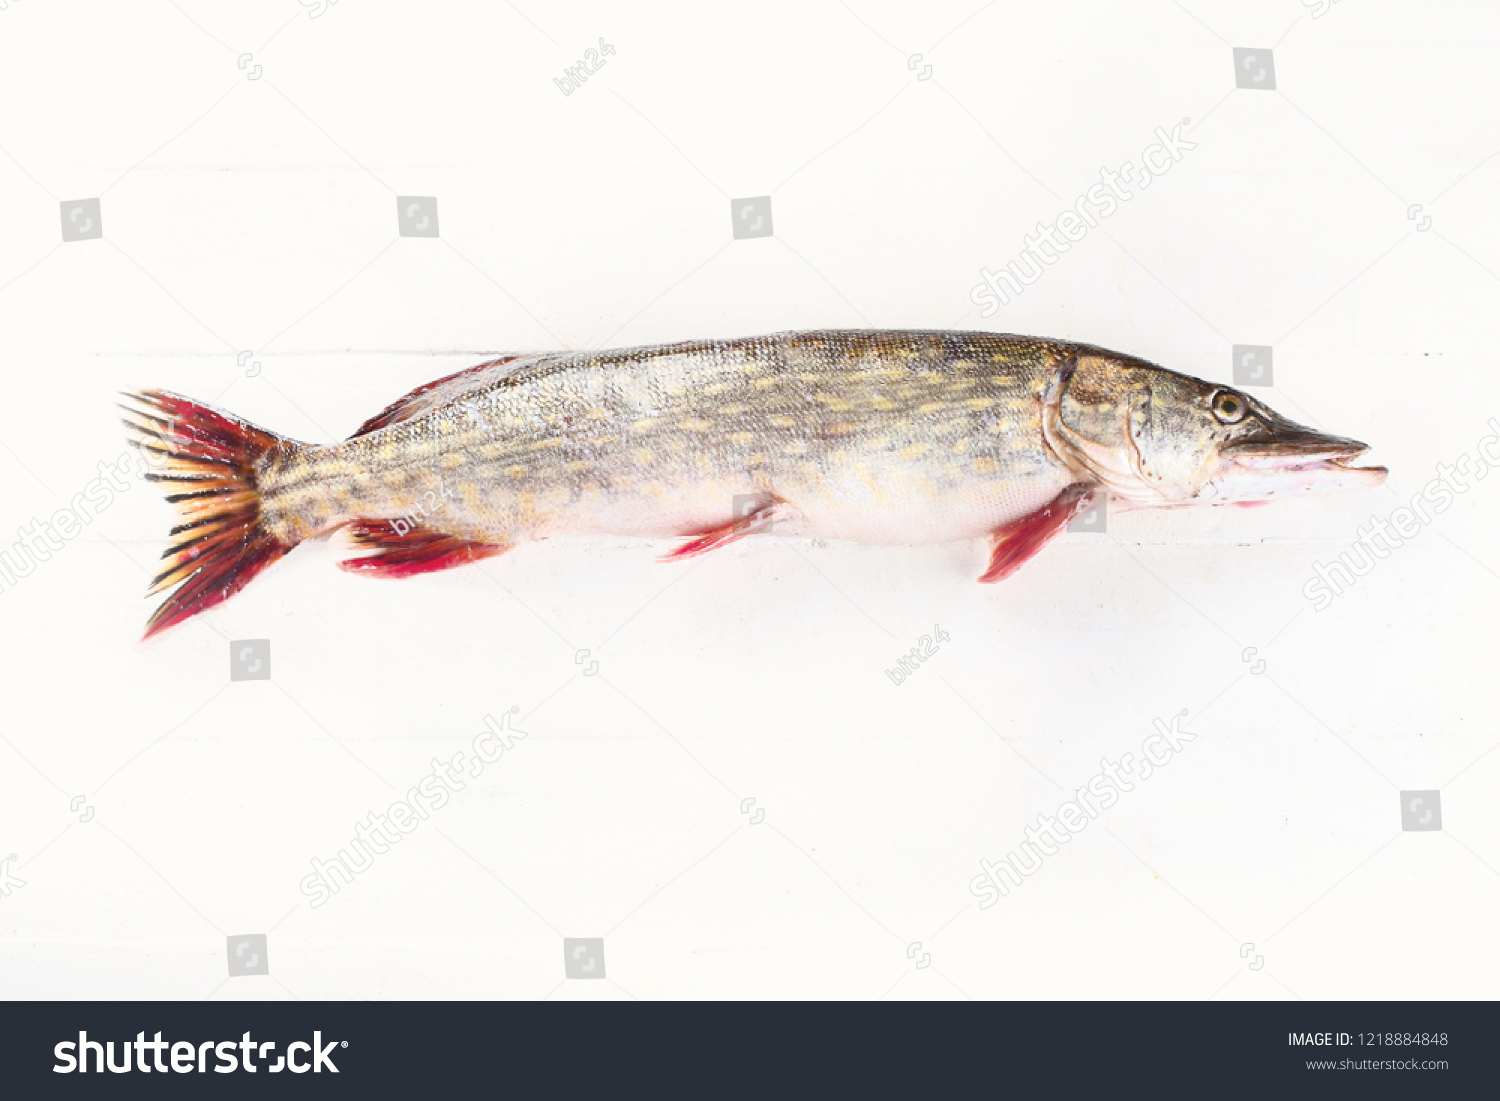 European pike. Northern Pike ( Esox Lucius ) on white wooden background with copy space #1218884848